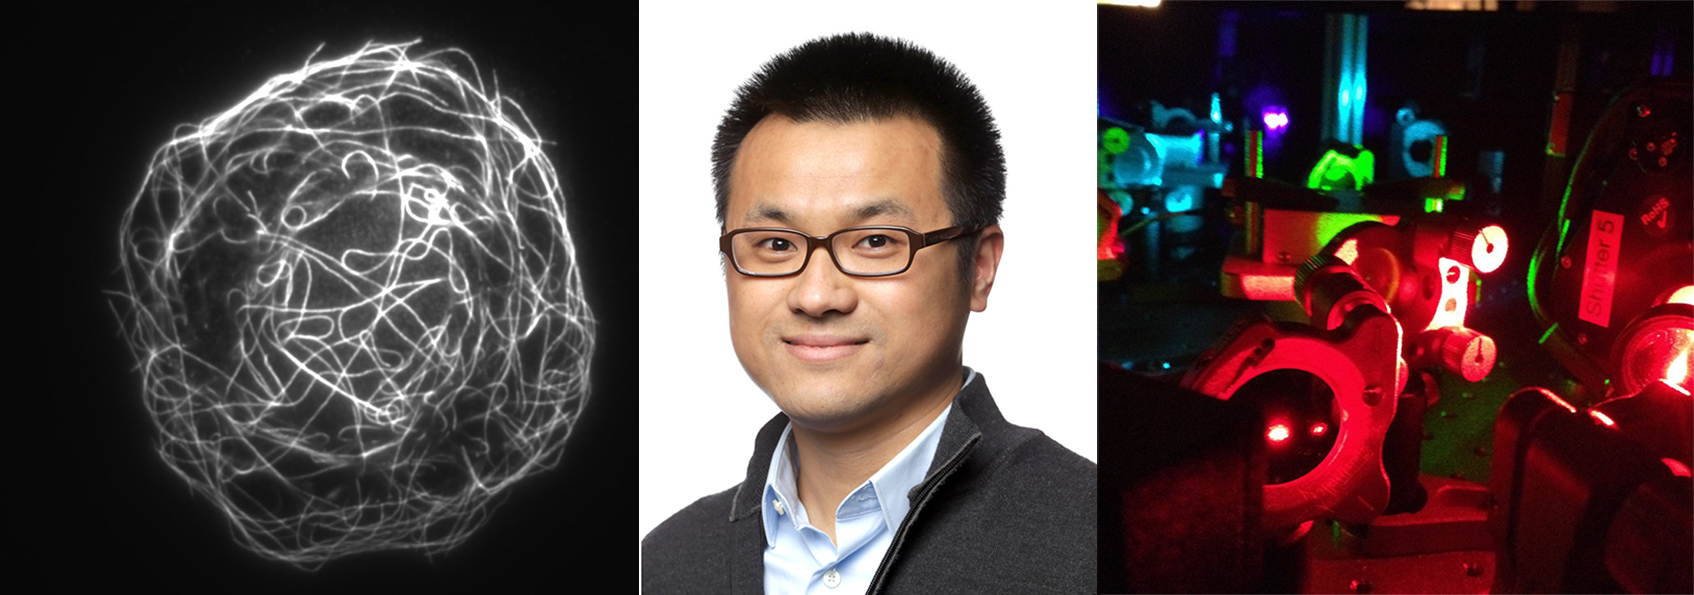 Ying Hu, and expert on super resolution imaging, is joining our department as an assistant professor in Fall 2018!
                  